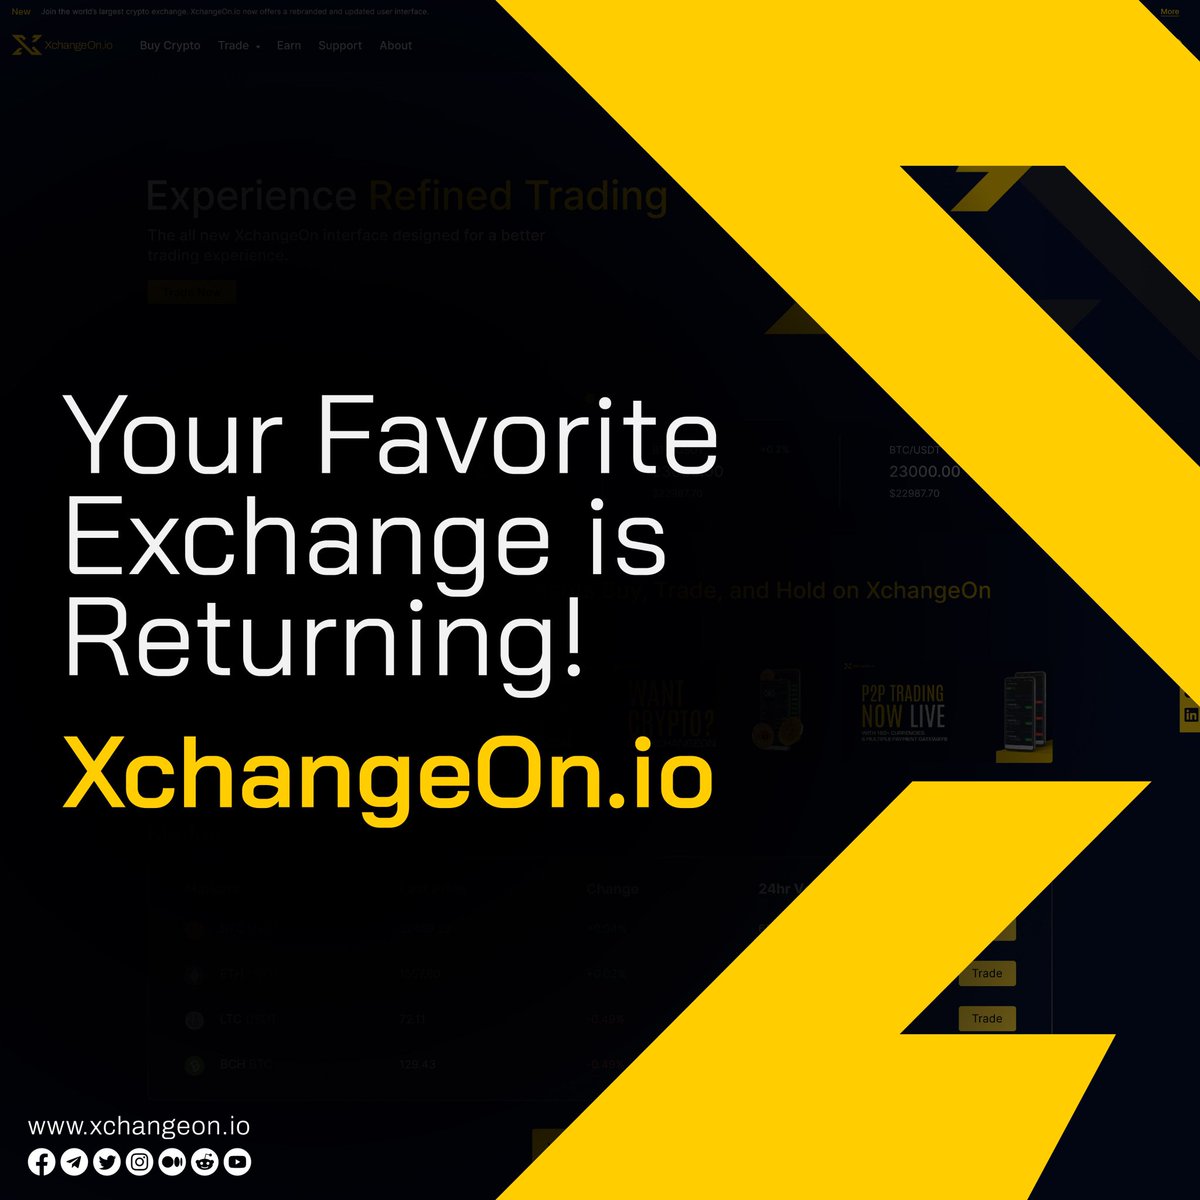 Guess who's back? 
Your favorite exchange, XchangeON! 🎉 
Get ready for an exciting comeback filled with easy trading and awesome features. 

Stay tuned for updates! 

#XchangeON #EasyTrading #Trading #cryptoexchange #cryptocurrency #CryptoNews